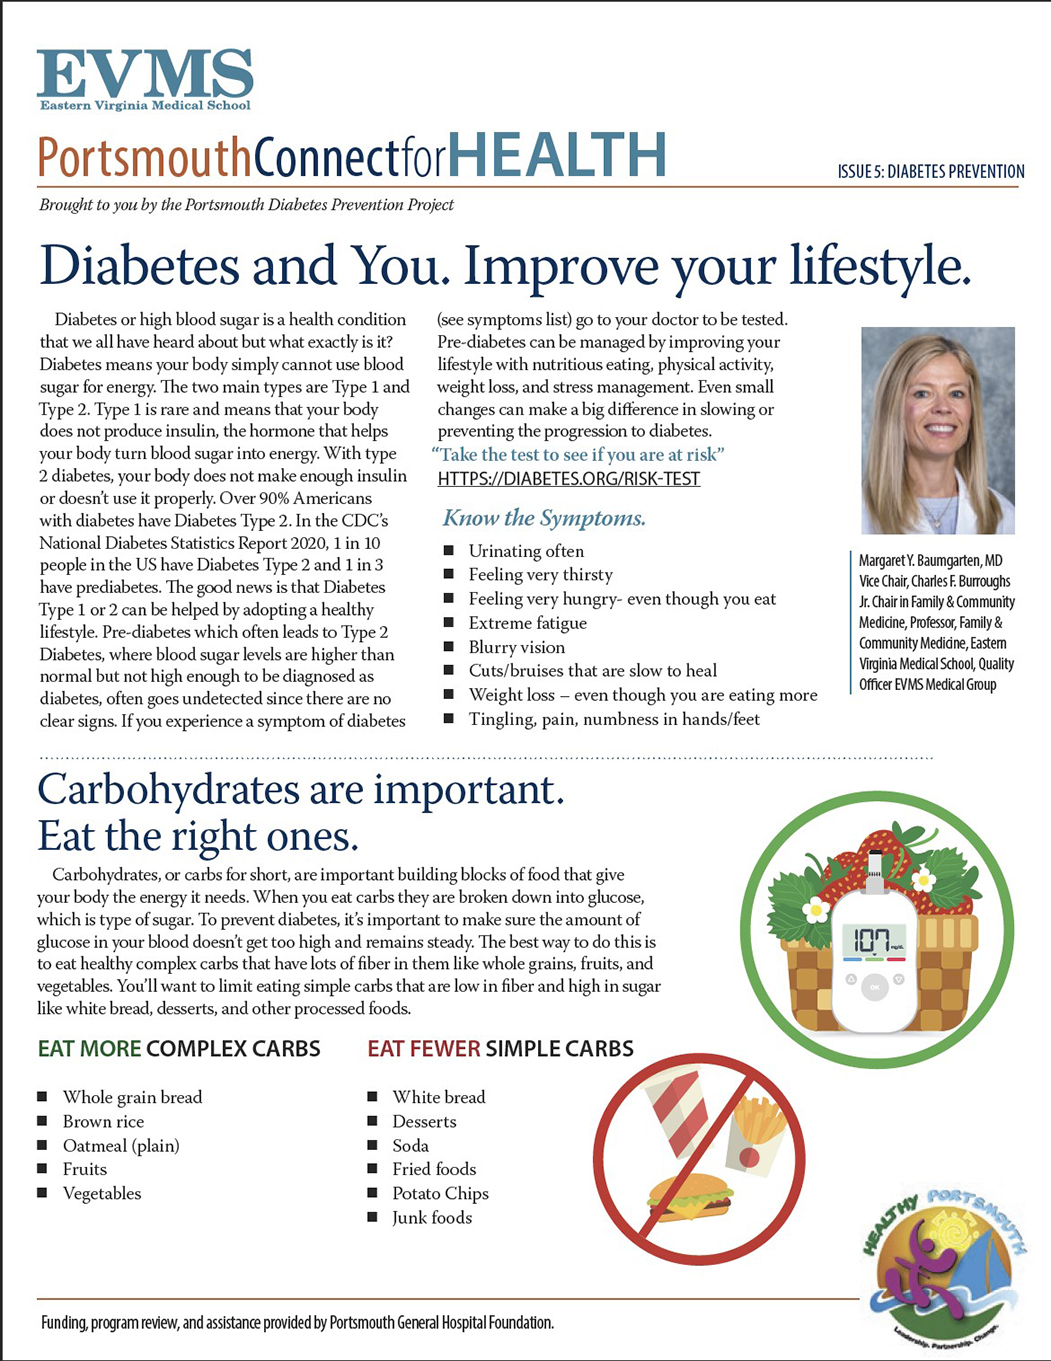 Cover of a newsletter with the topic of Diabetes Prevention